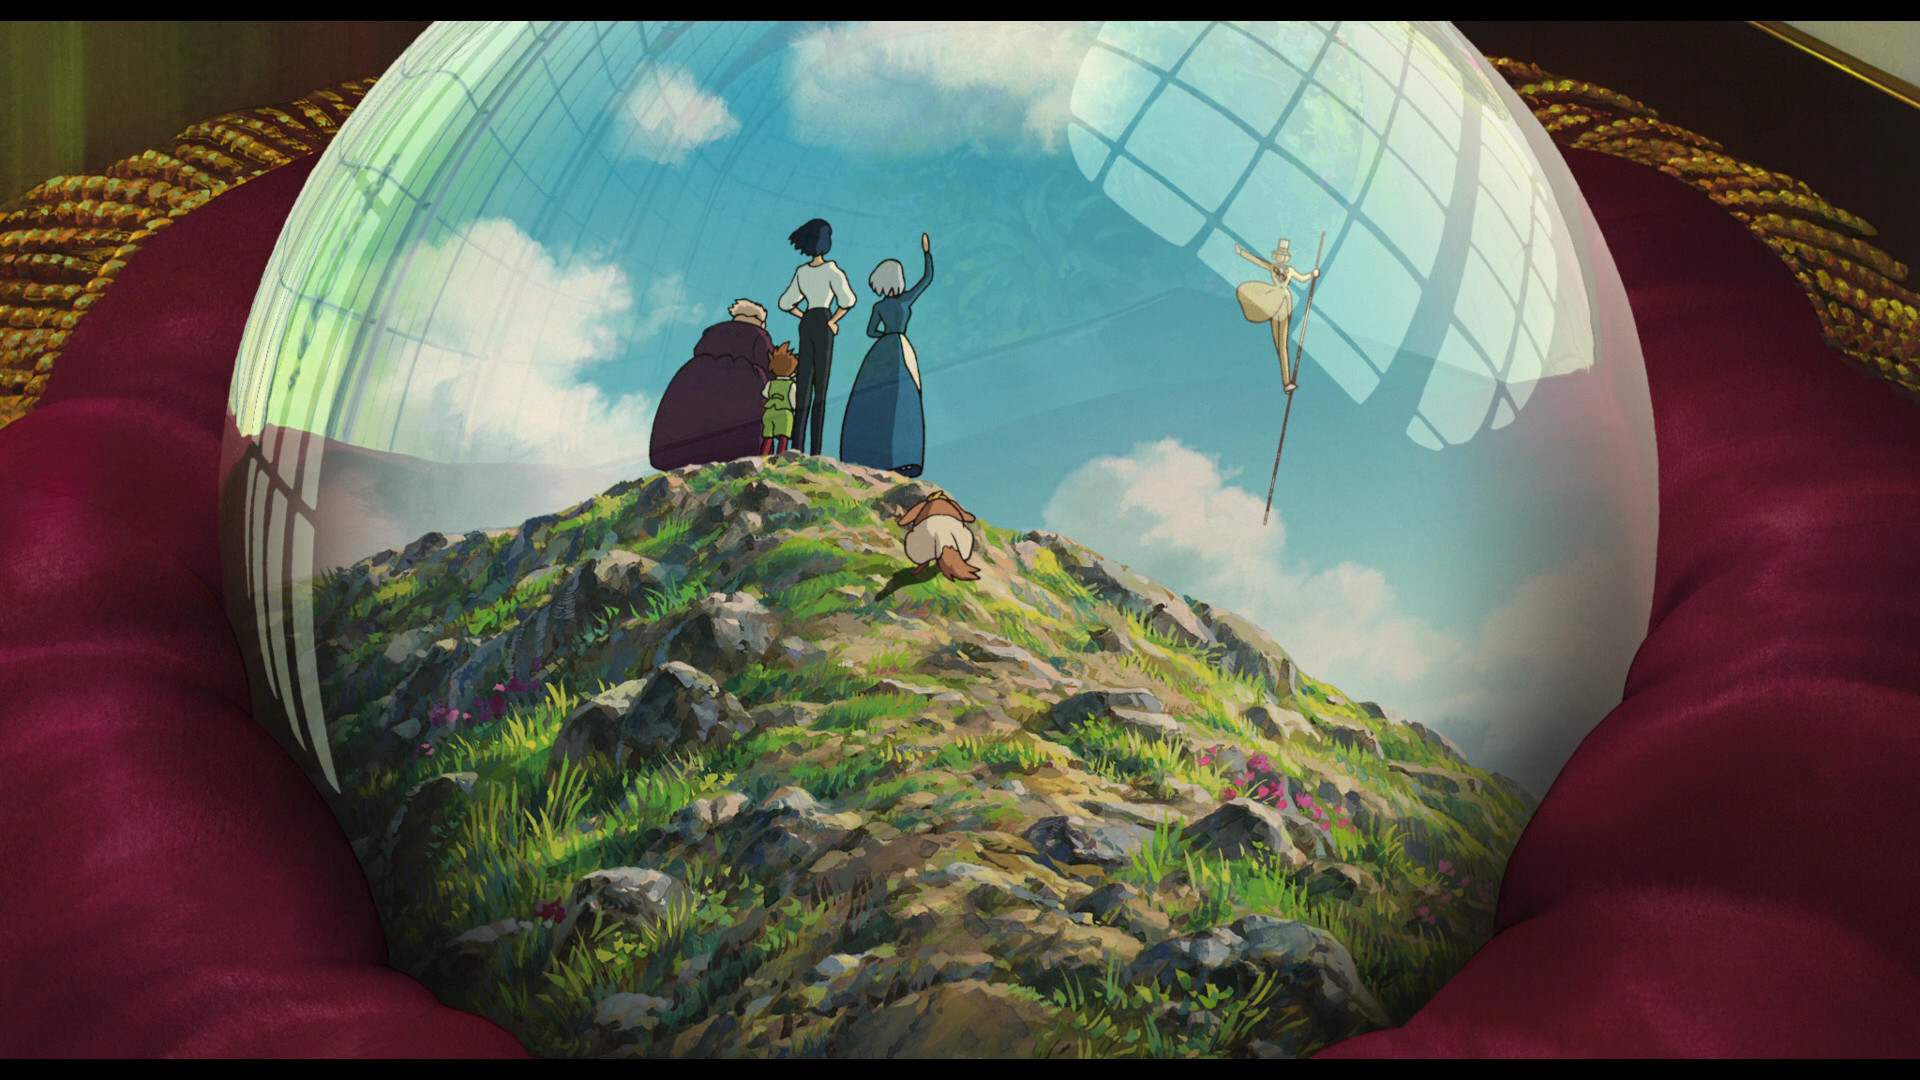 OVERALL 4.0 / 5. Overall, Howls Moving Castle